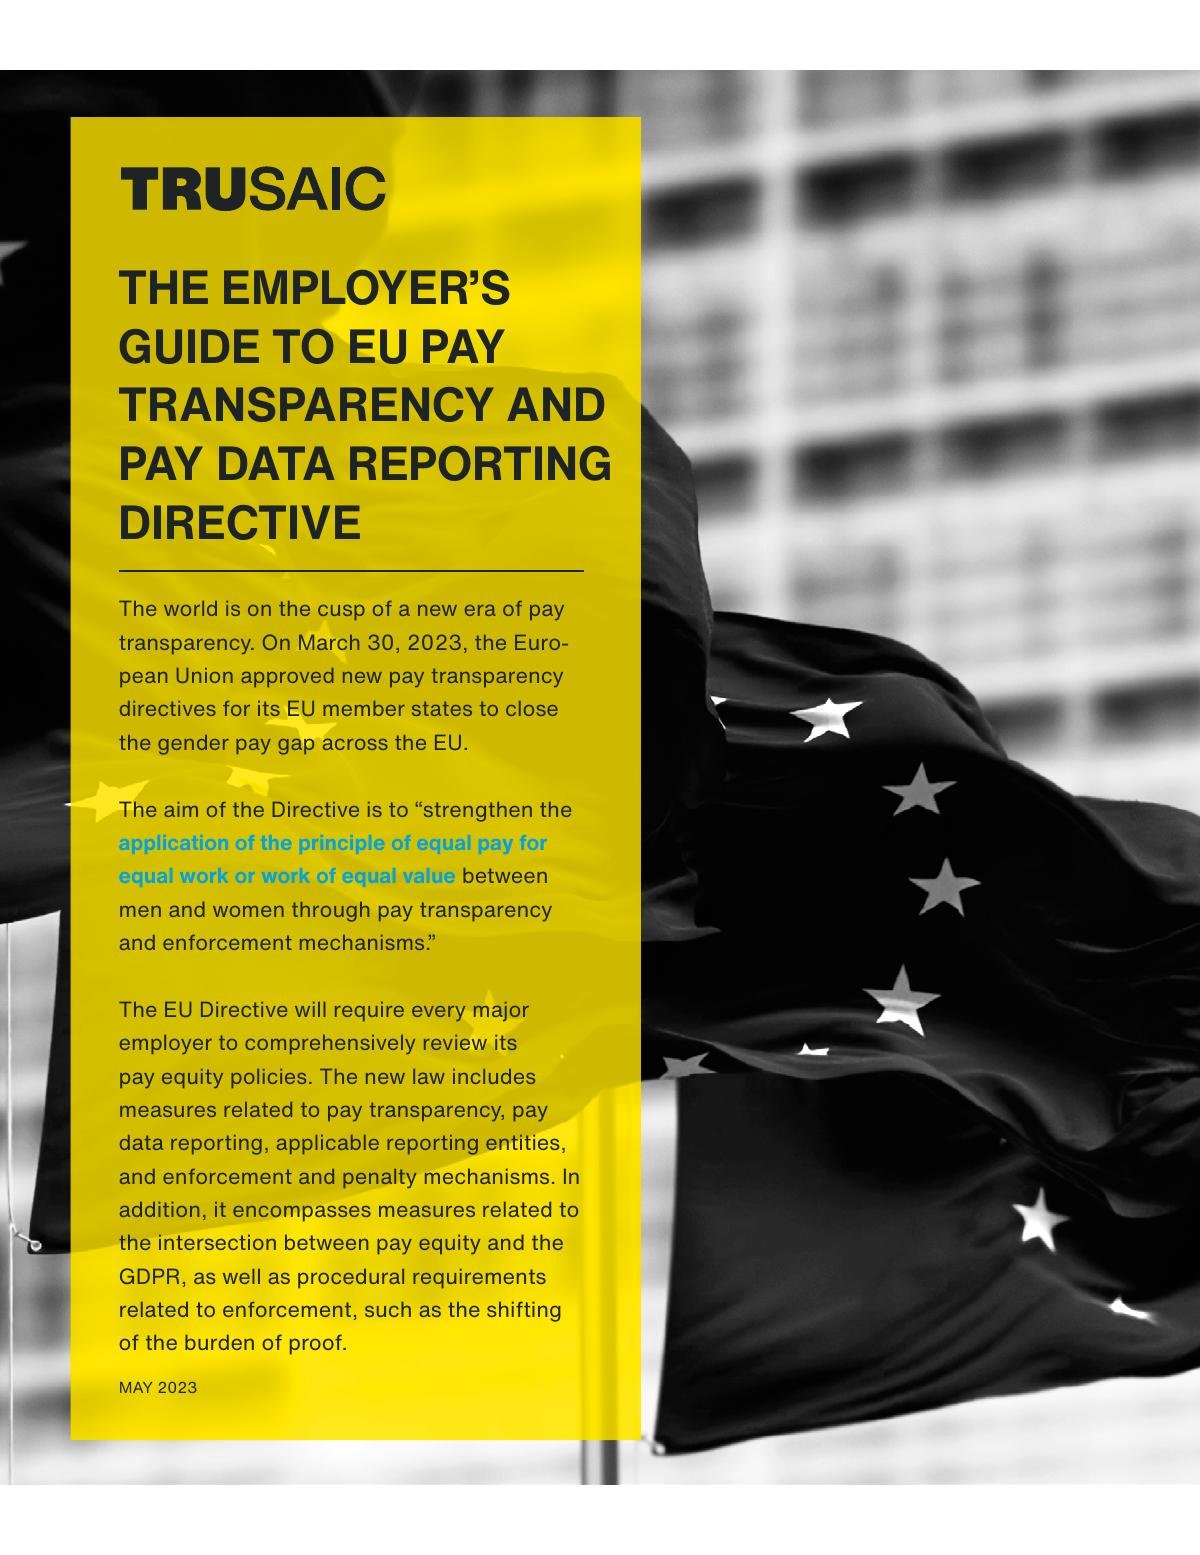 The Employer's Guide To EU Pay Transparency and Pay Reporting Directive